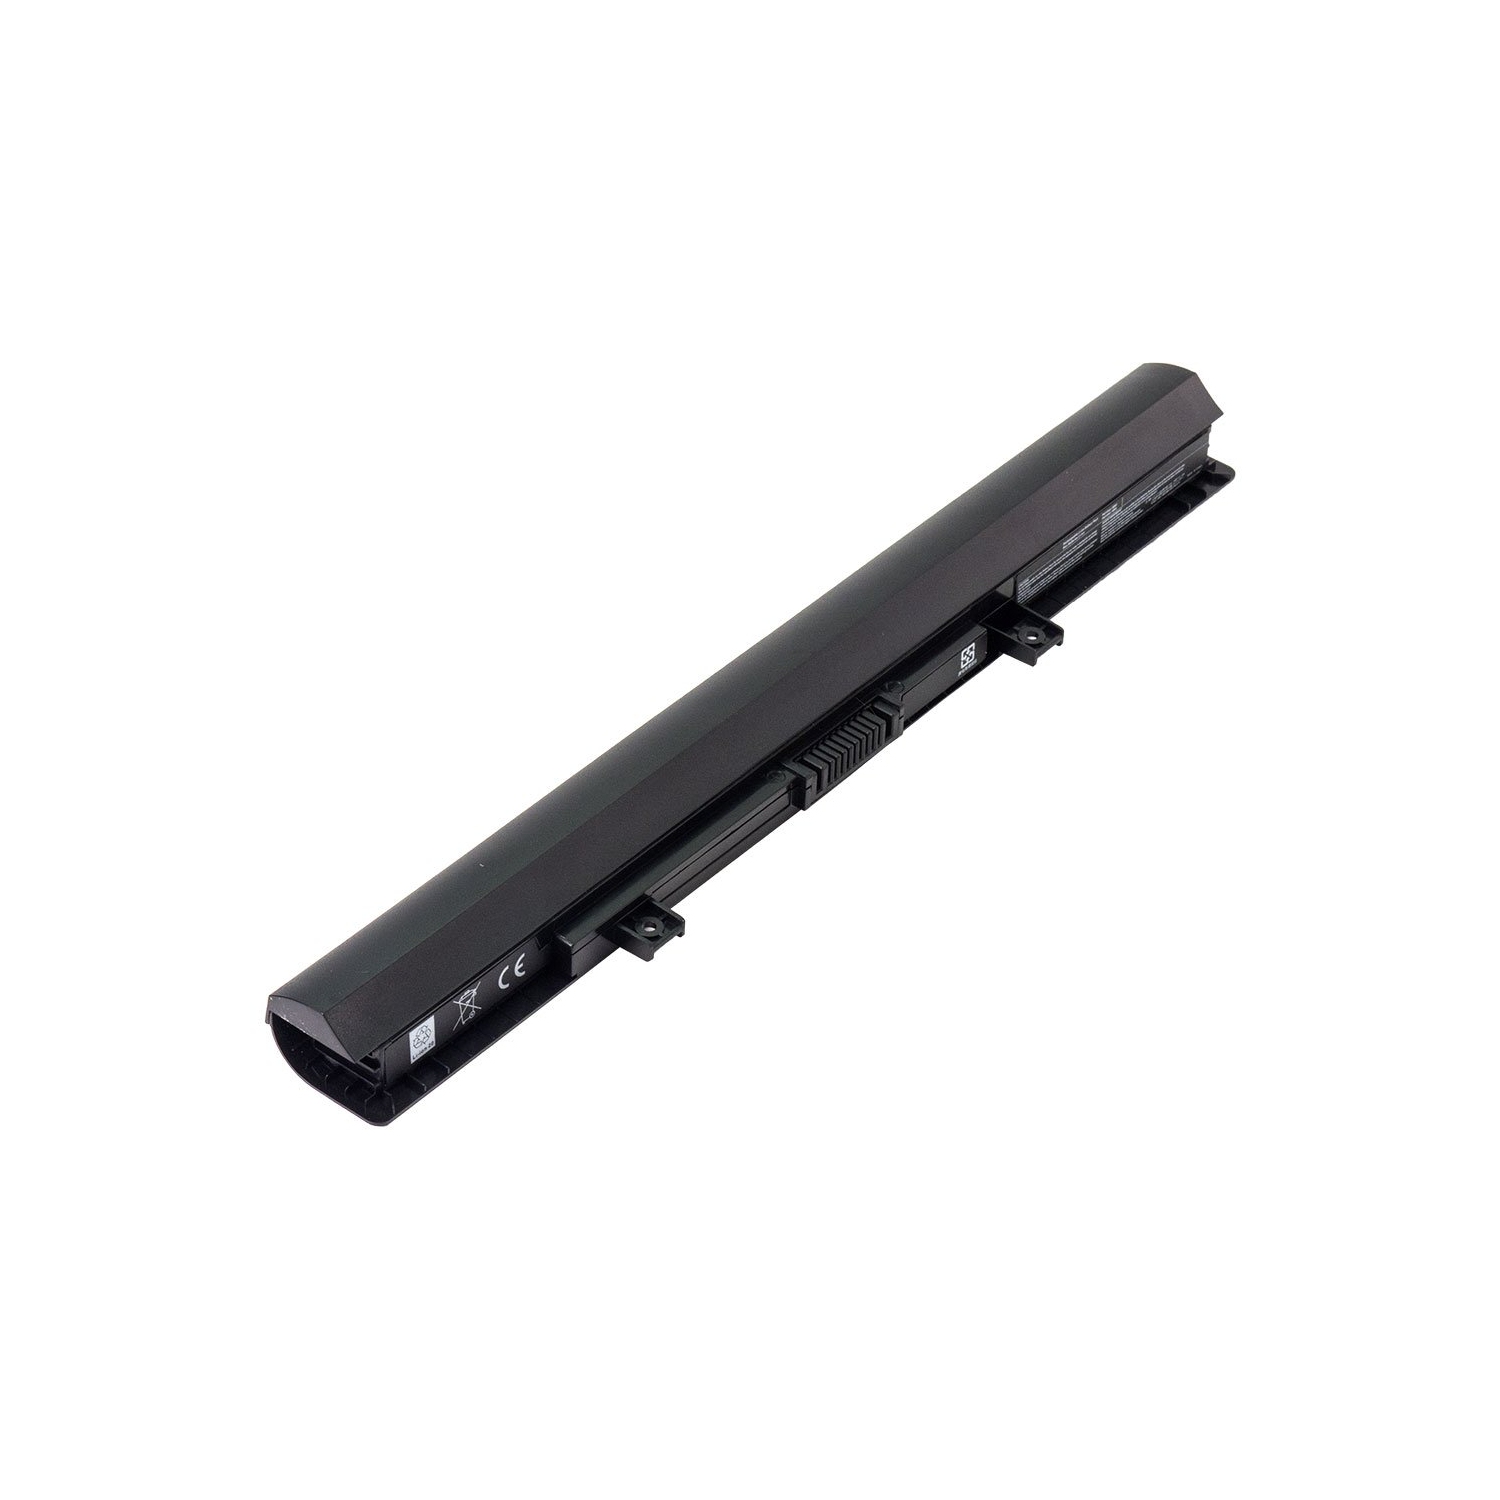 Laptop Battery Replacement for Toshiba Satellite Pro C50-B, PA5184U-1BRS, PA5185U, PA5185U-1BRS, PA5186U-1BRS, PA5195U-1BRS